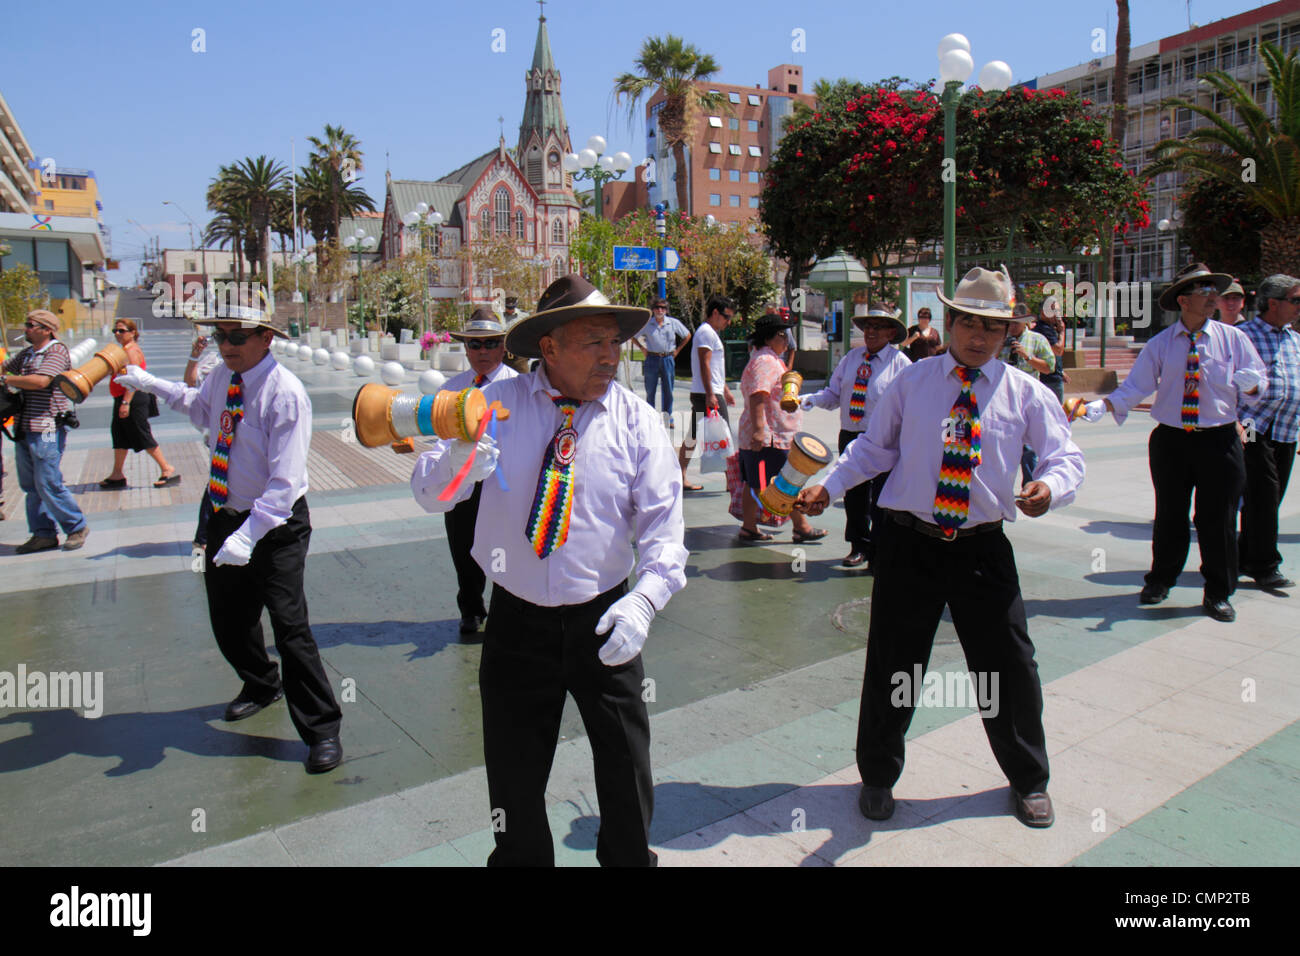 Arica Chile,Plaza Colon,Carnaval Andino,Andean Carnival,parade,indigenous,Aymara heritage,folklore traditional dance,troupe,Hispanic man men male adul Stock Photo